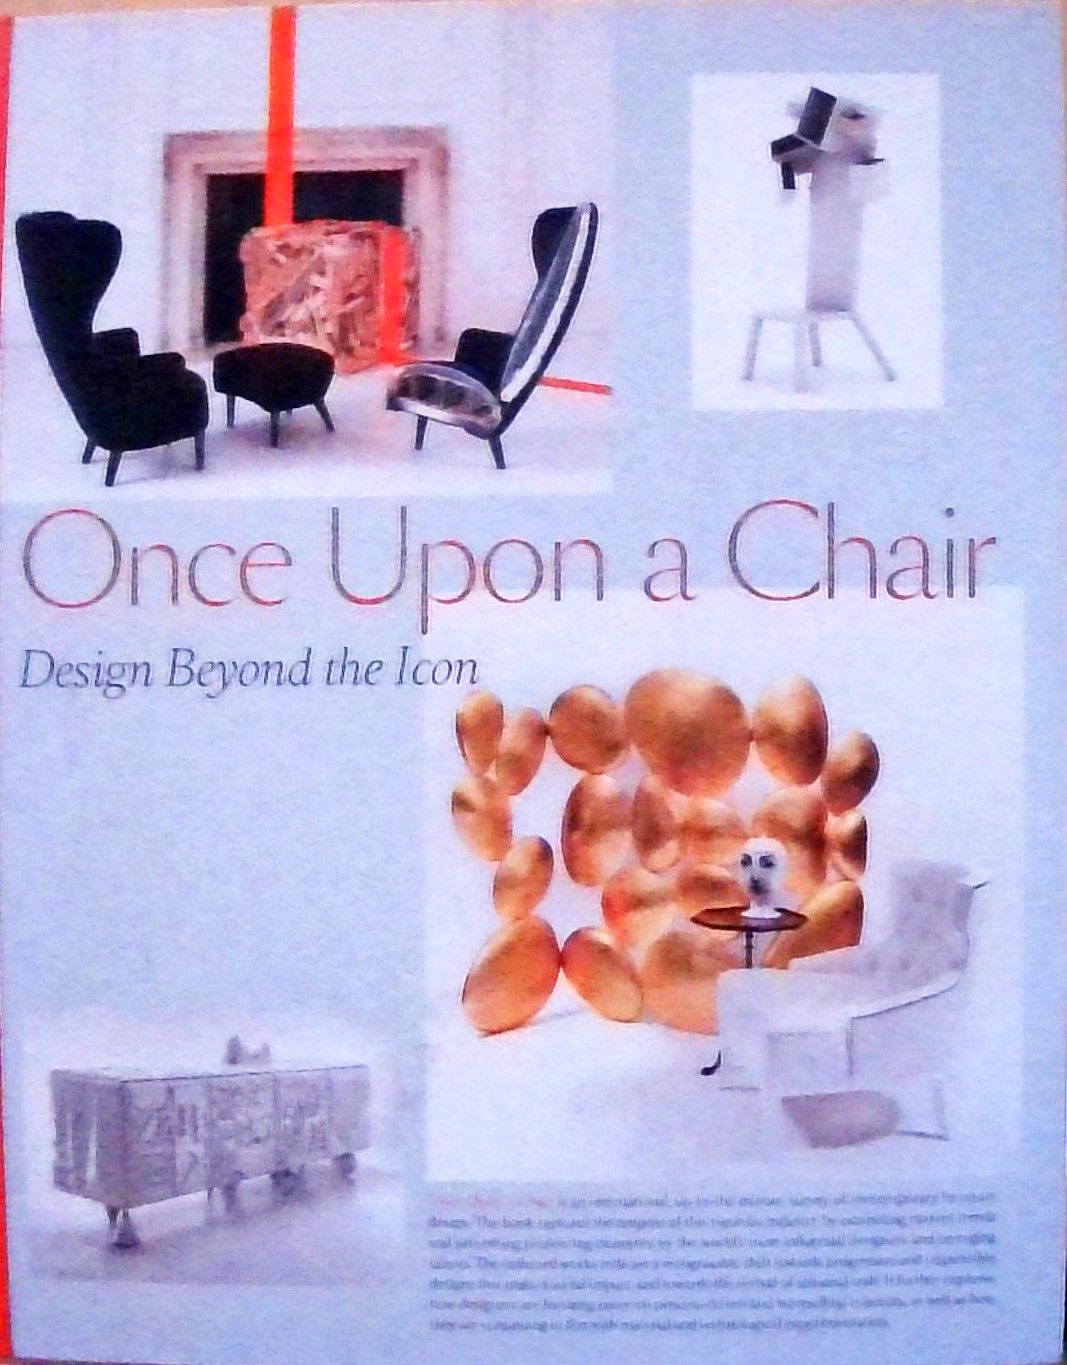 Once Upon a Chair: Design Beyond the Icon - Gestalten, Kupetz Andrej and Moreno Gabriel